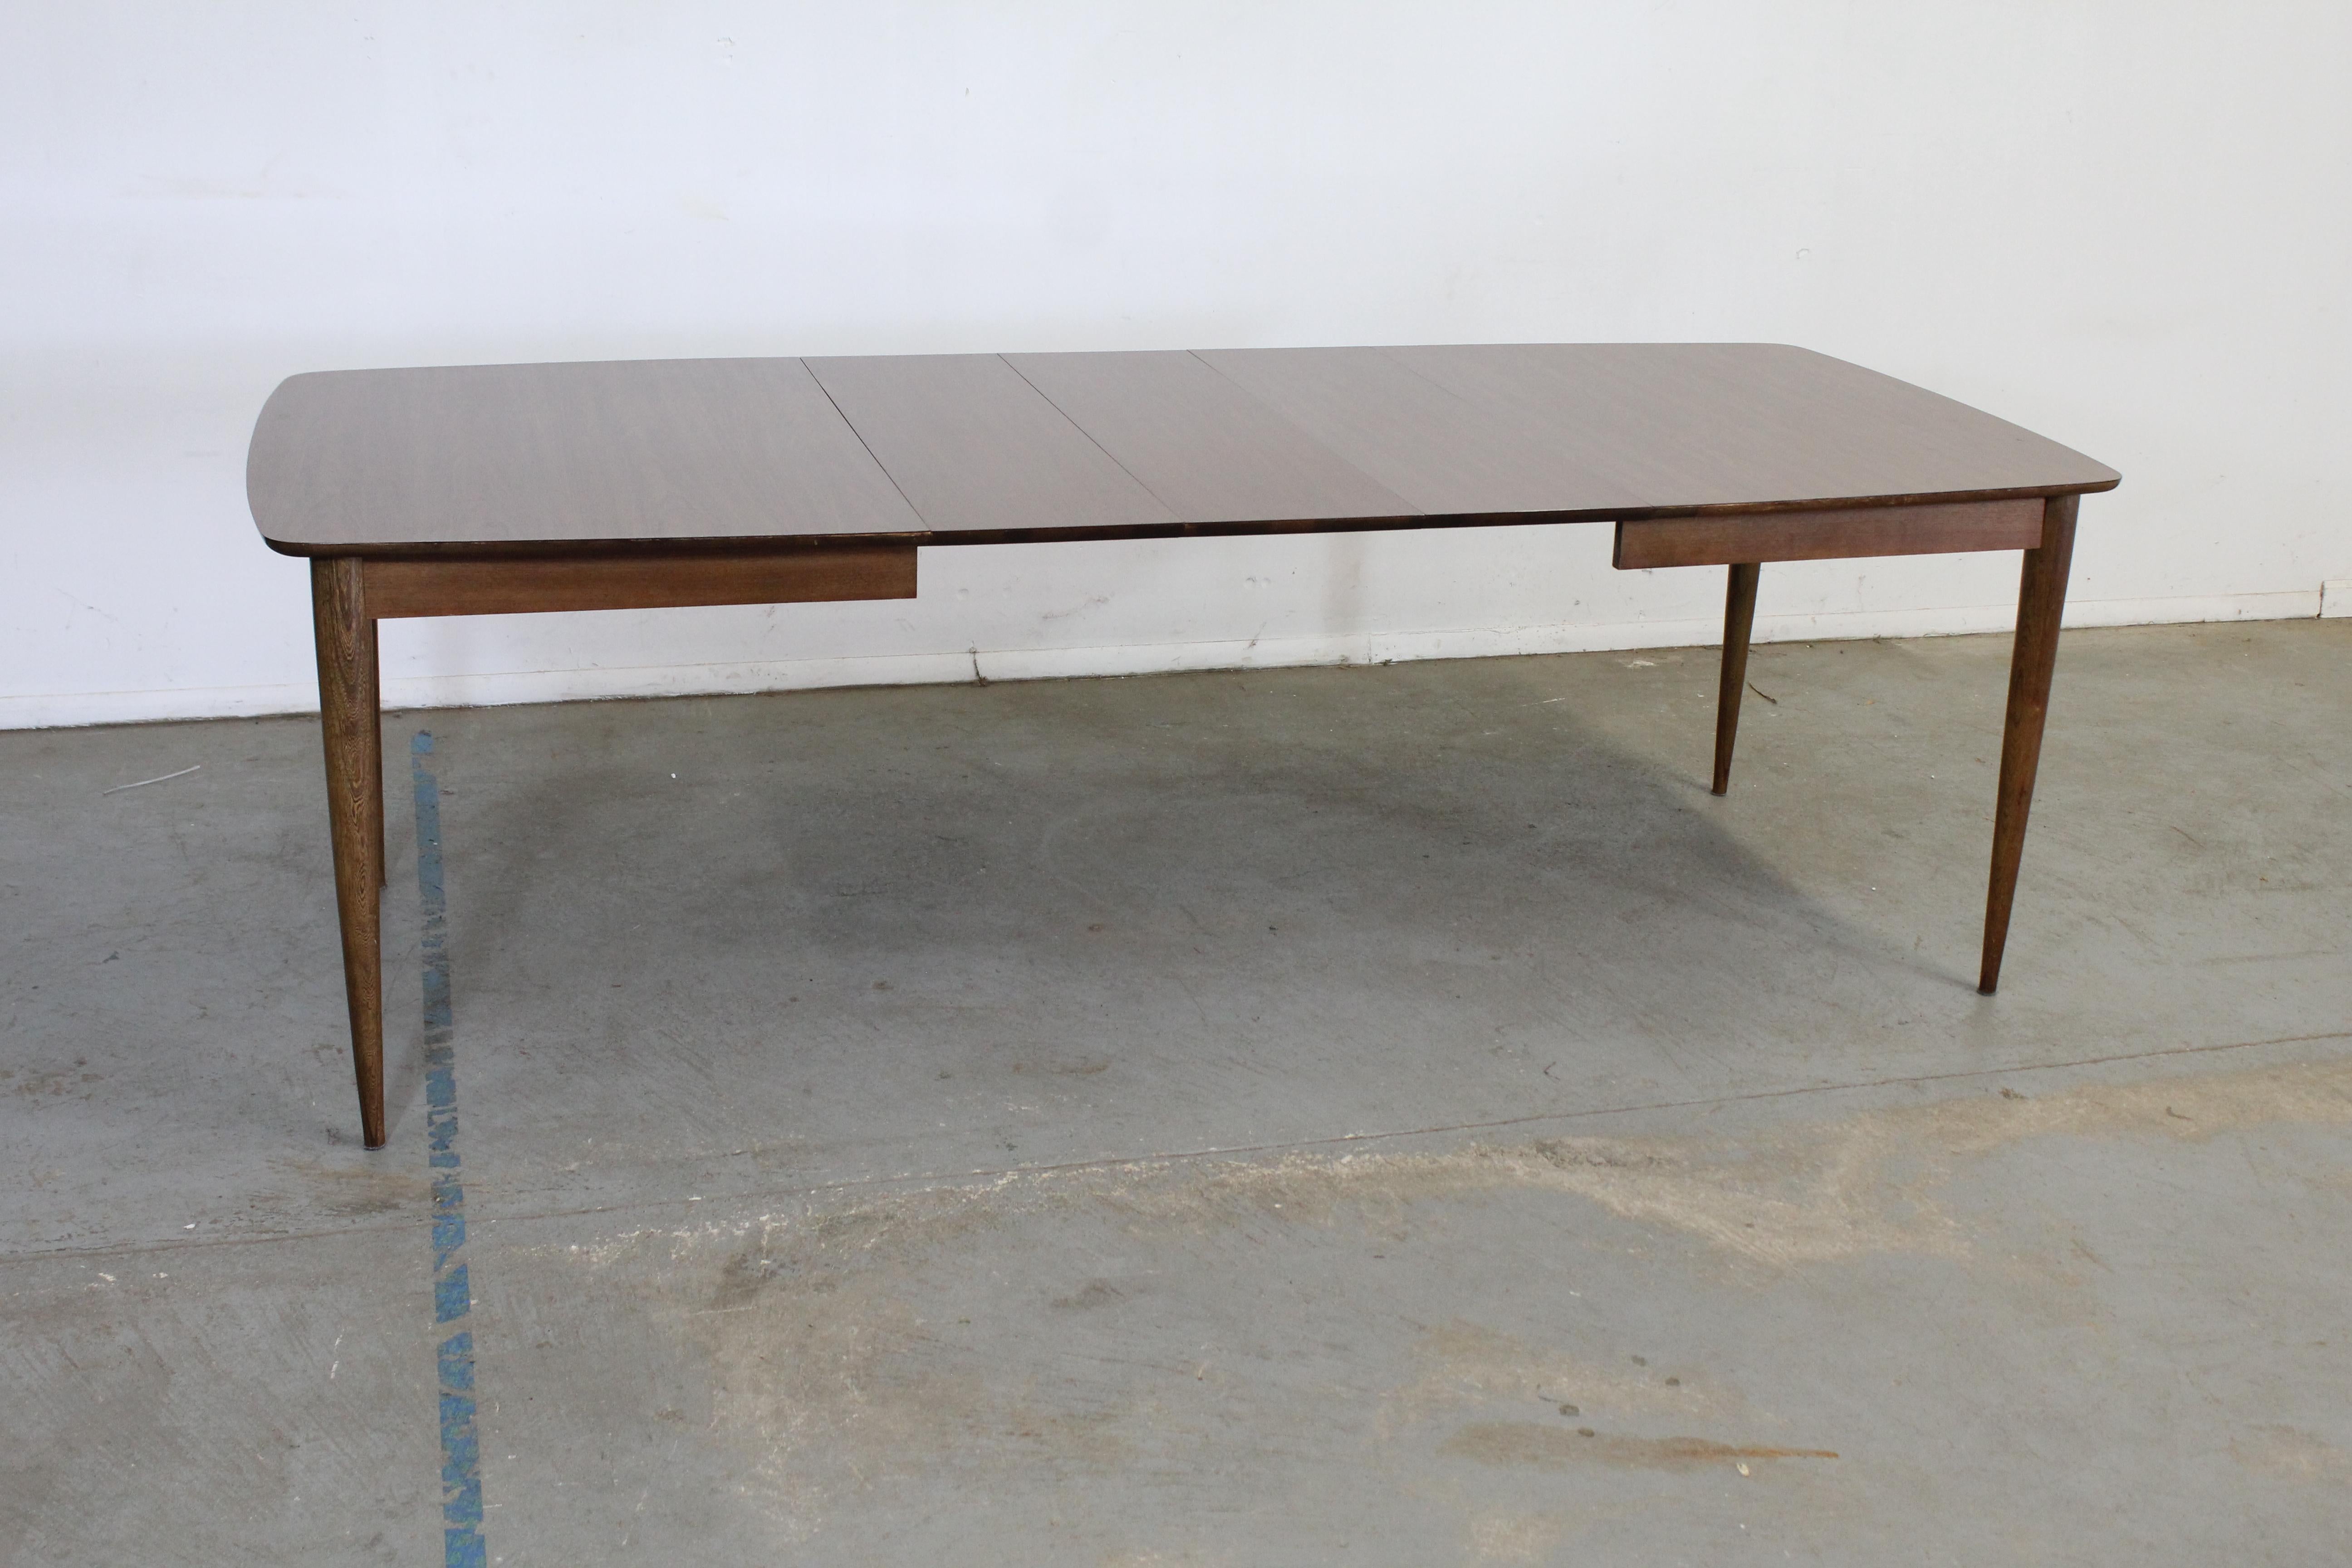 Mid-Century Stanley walnut surfboard dining table

Offered is amid-century modern vintage dining table that was designed Stanley Furniture. This table features a laminate top with tapered walnut legs. In good condition with some surface scratches